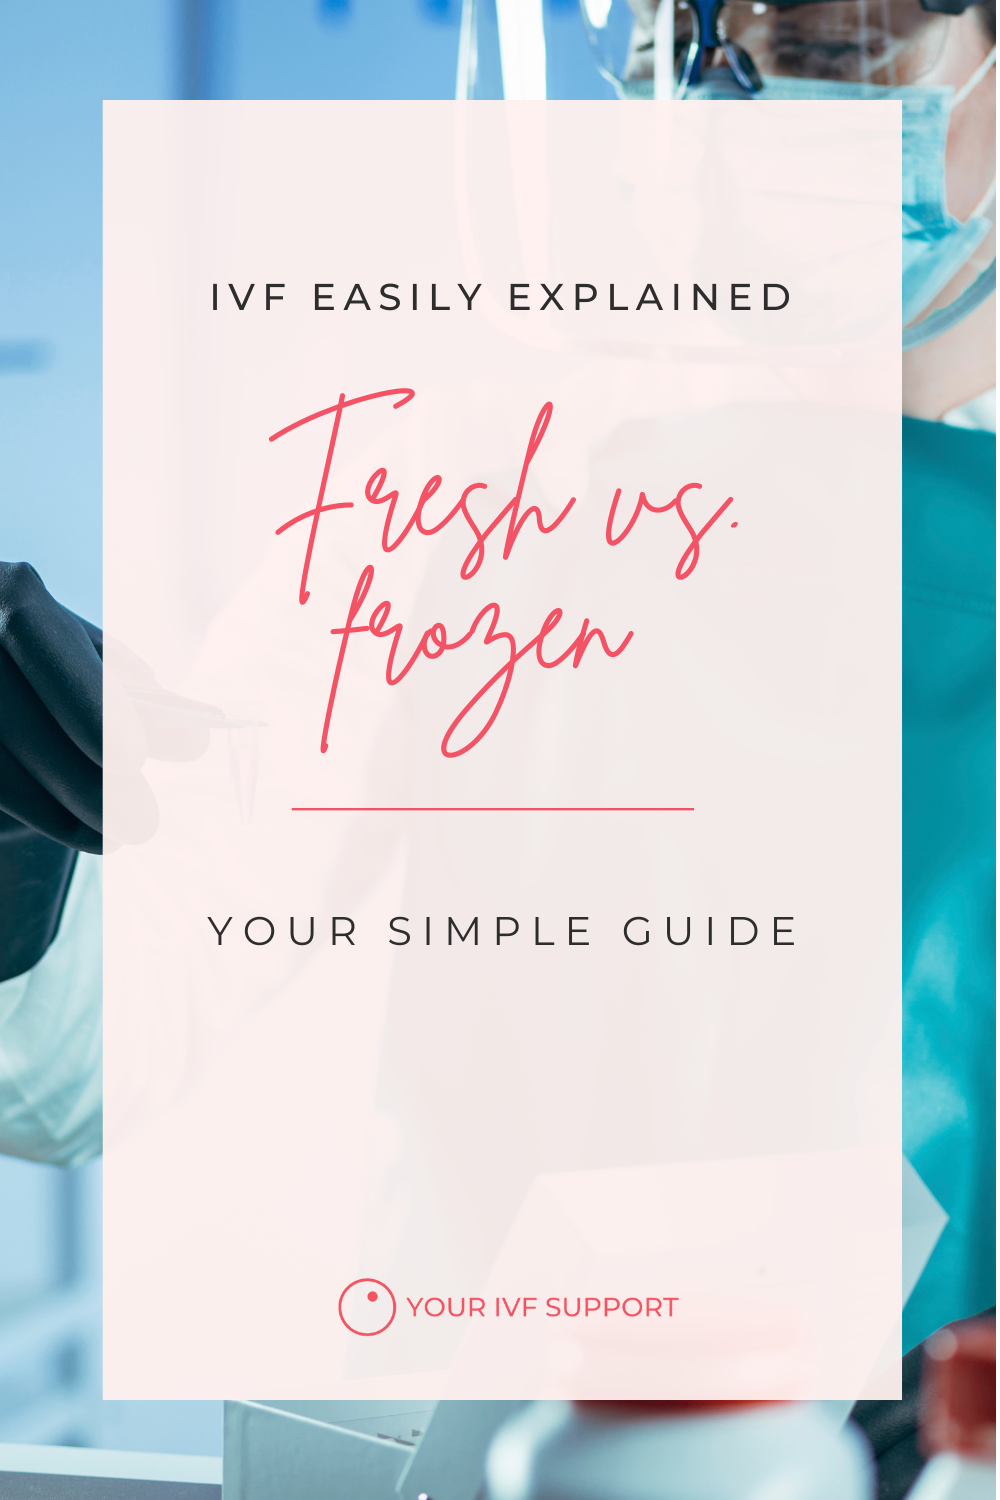 IVF easily explained: Fresh vs. frozen - your simple guide